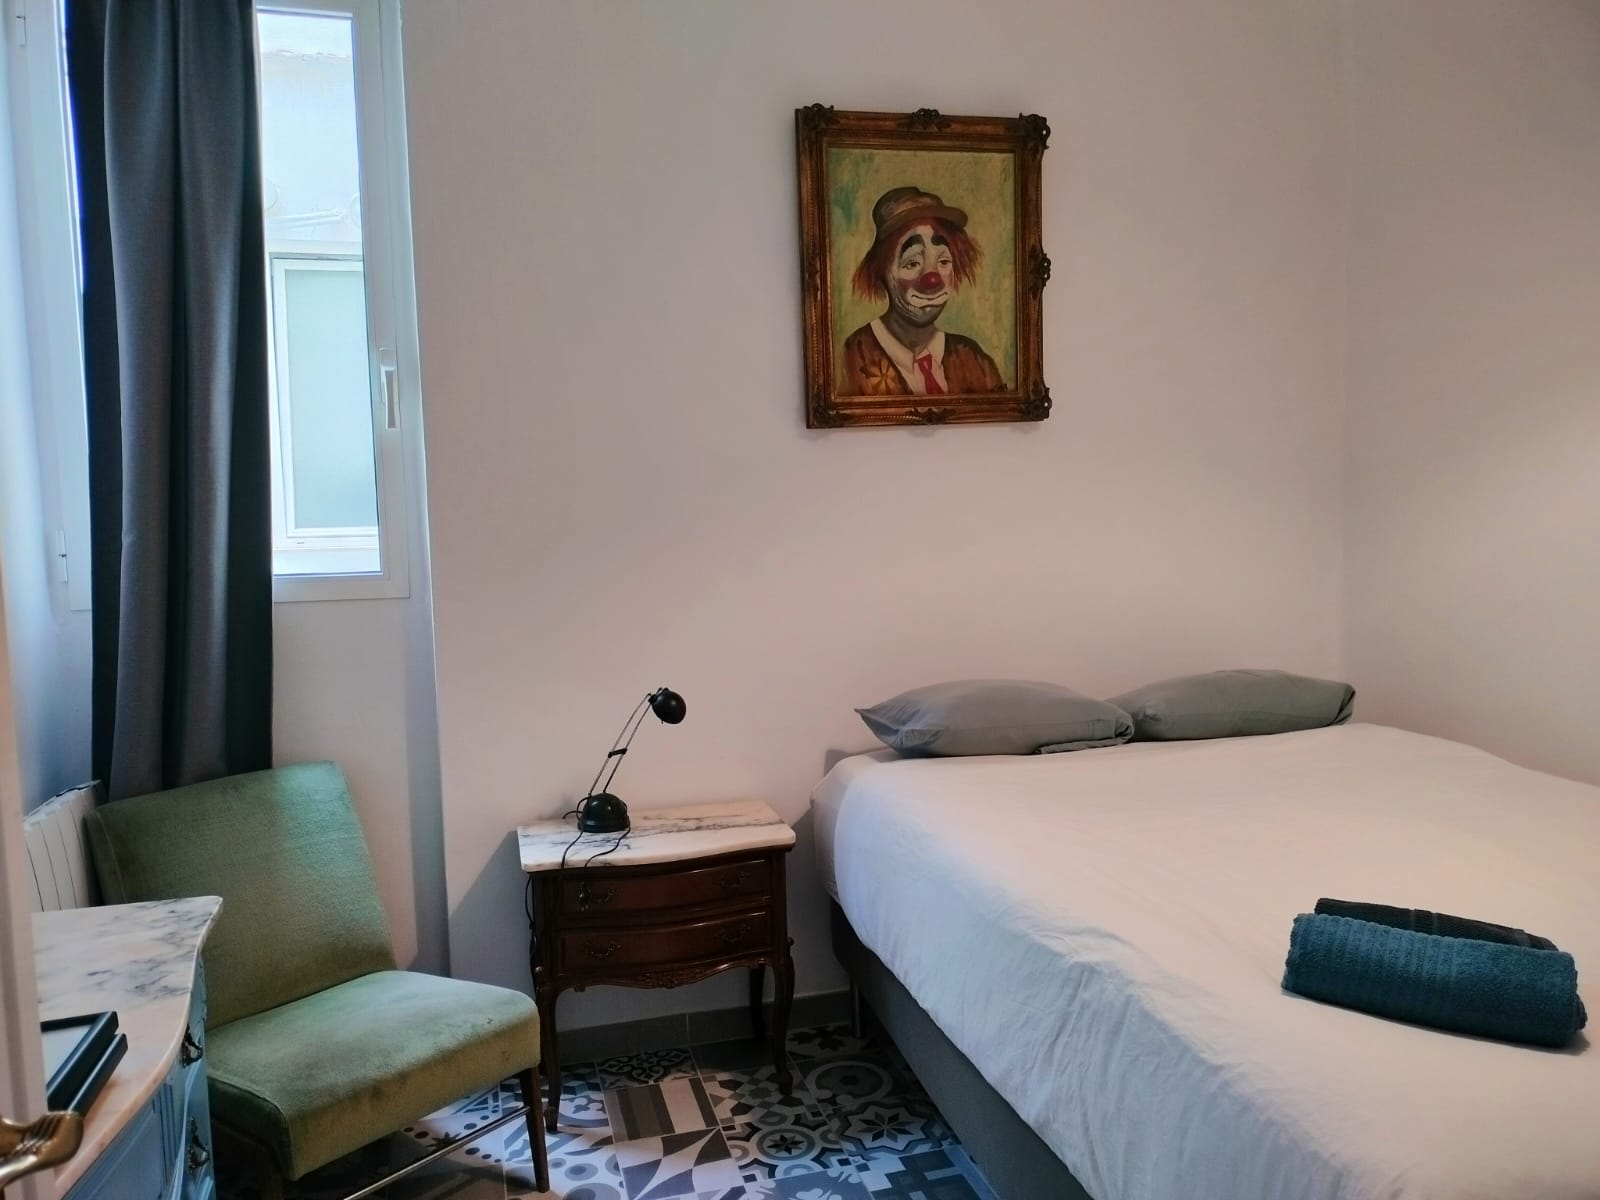 Literato Azorin - Lovely apartment for rent in Valencia